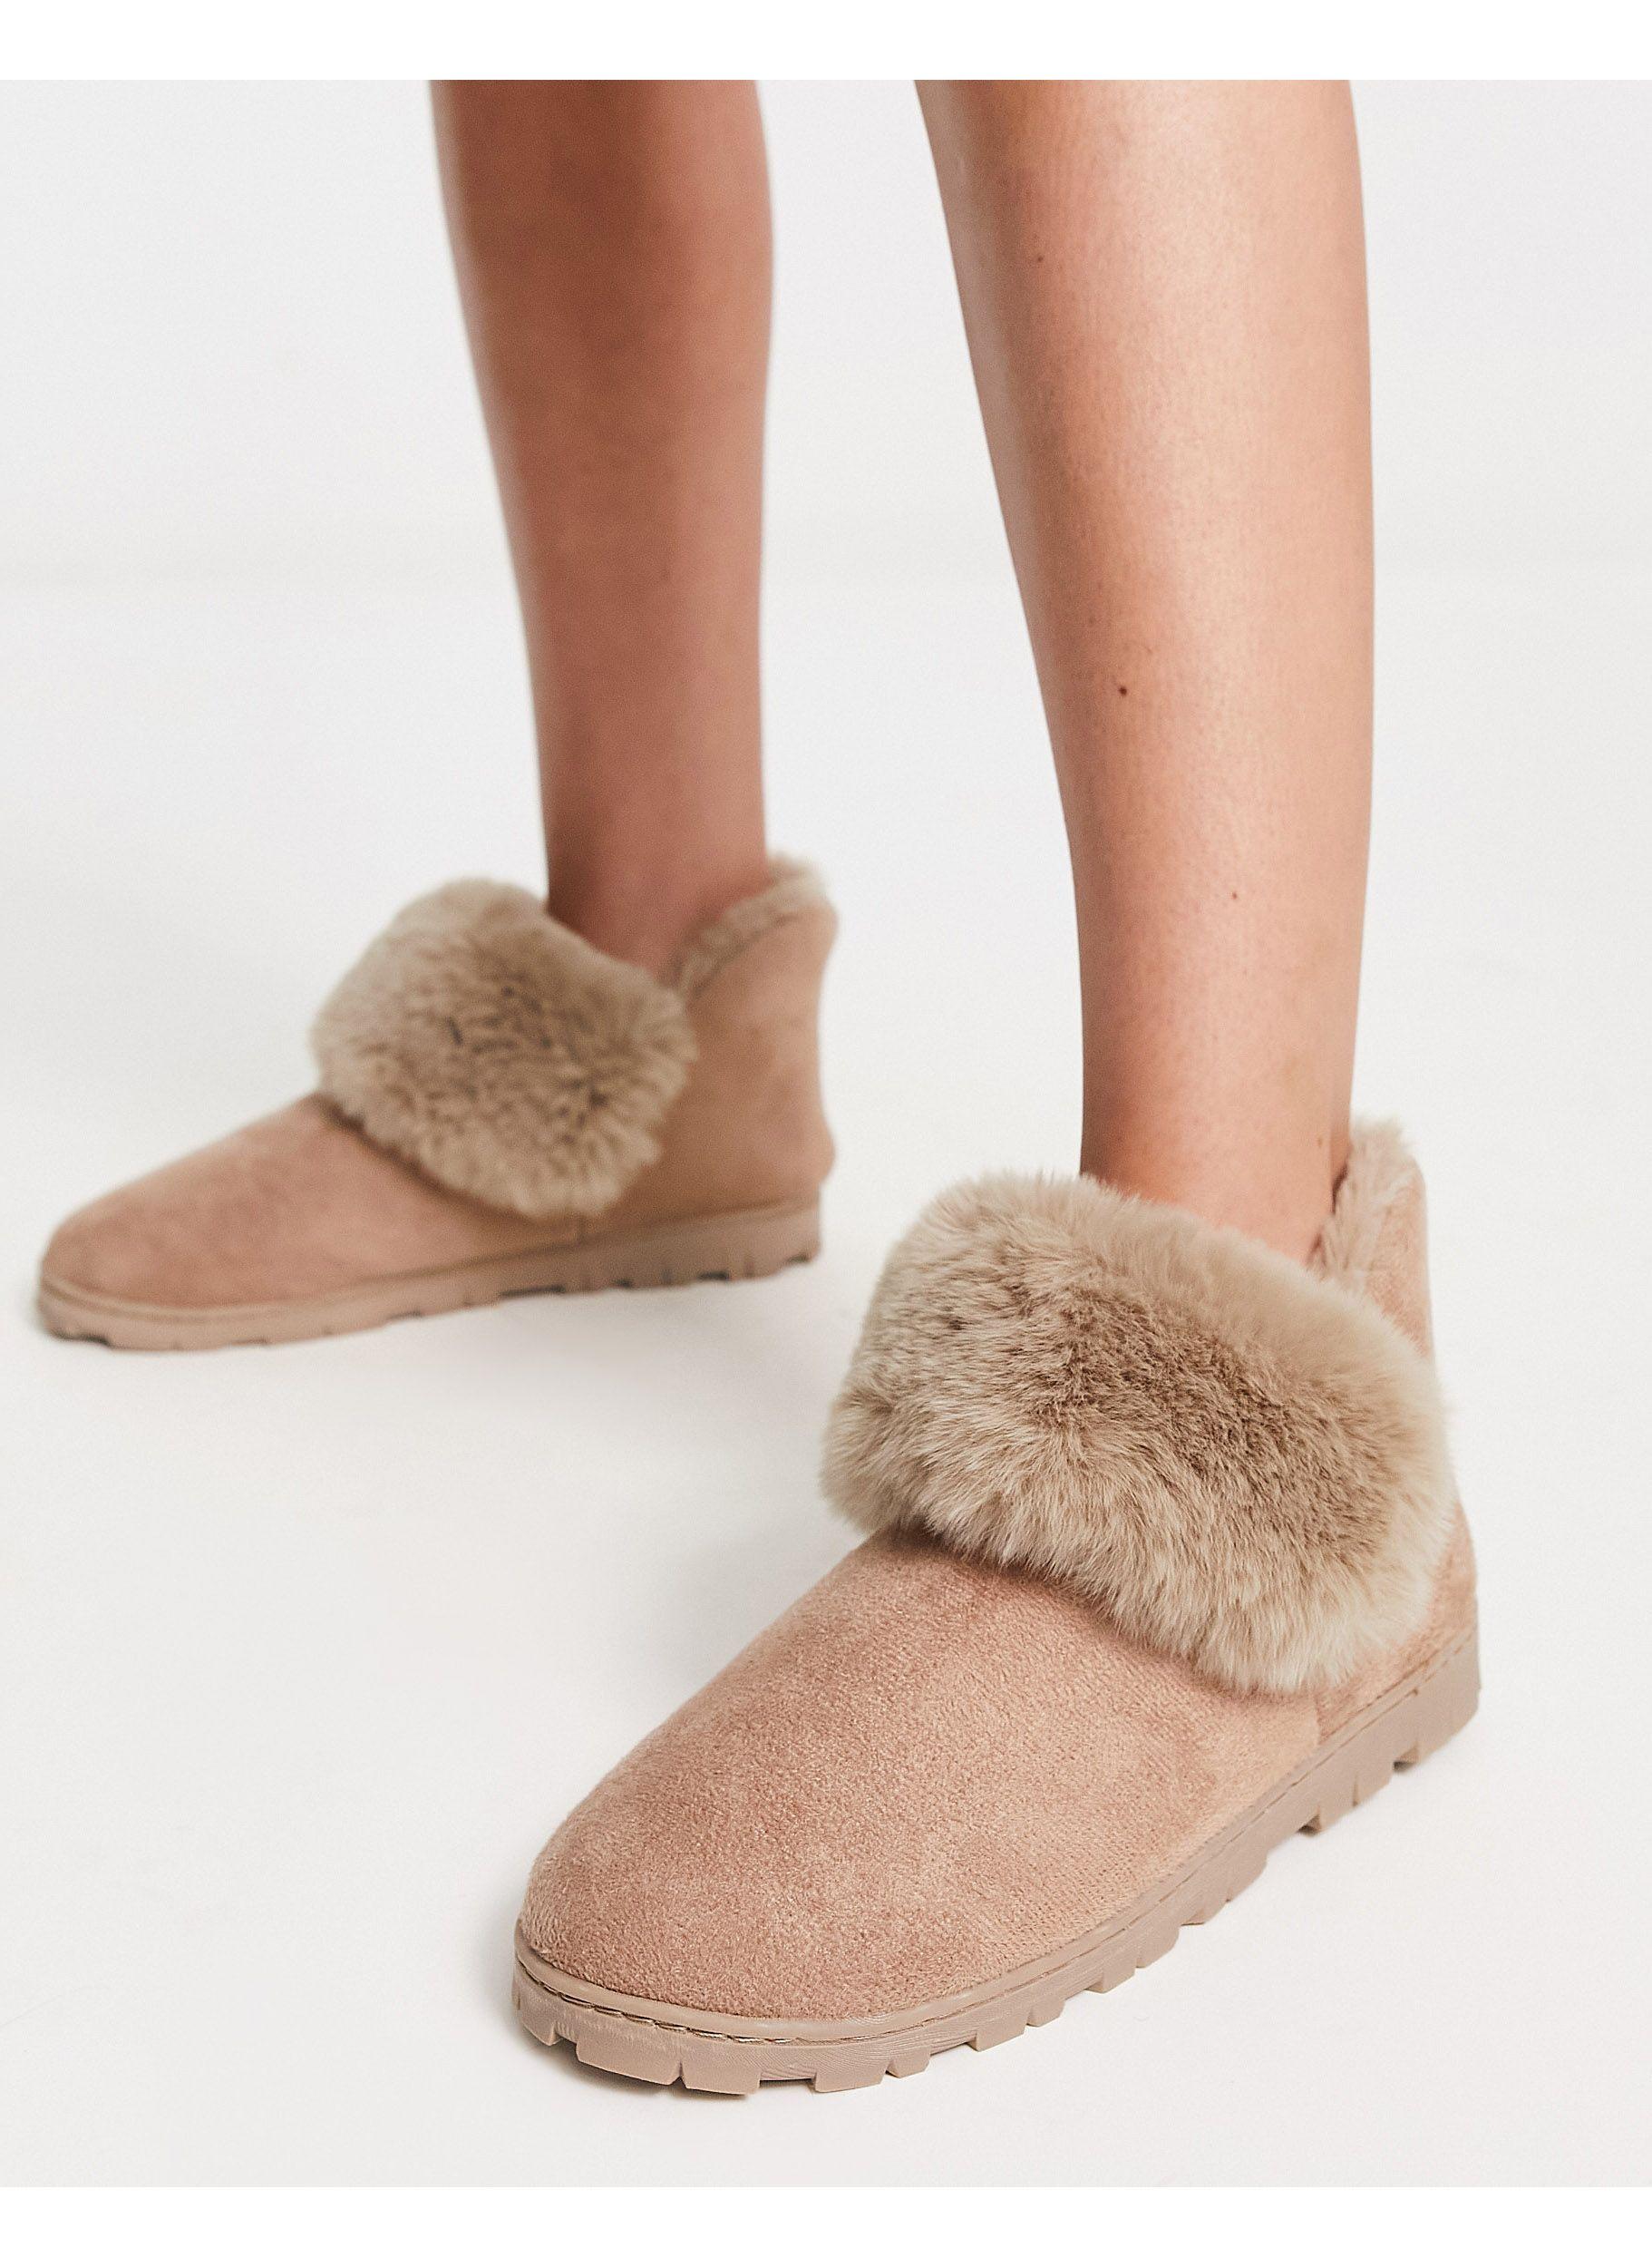 Hunkemöller Mila Faux Lined Indoor Bootie Slippers in Natural | Lyst